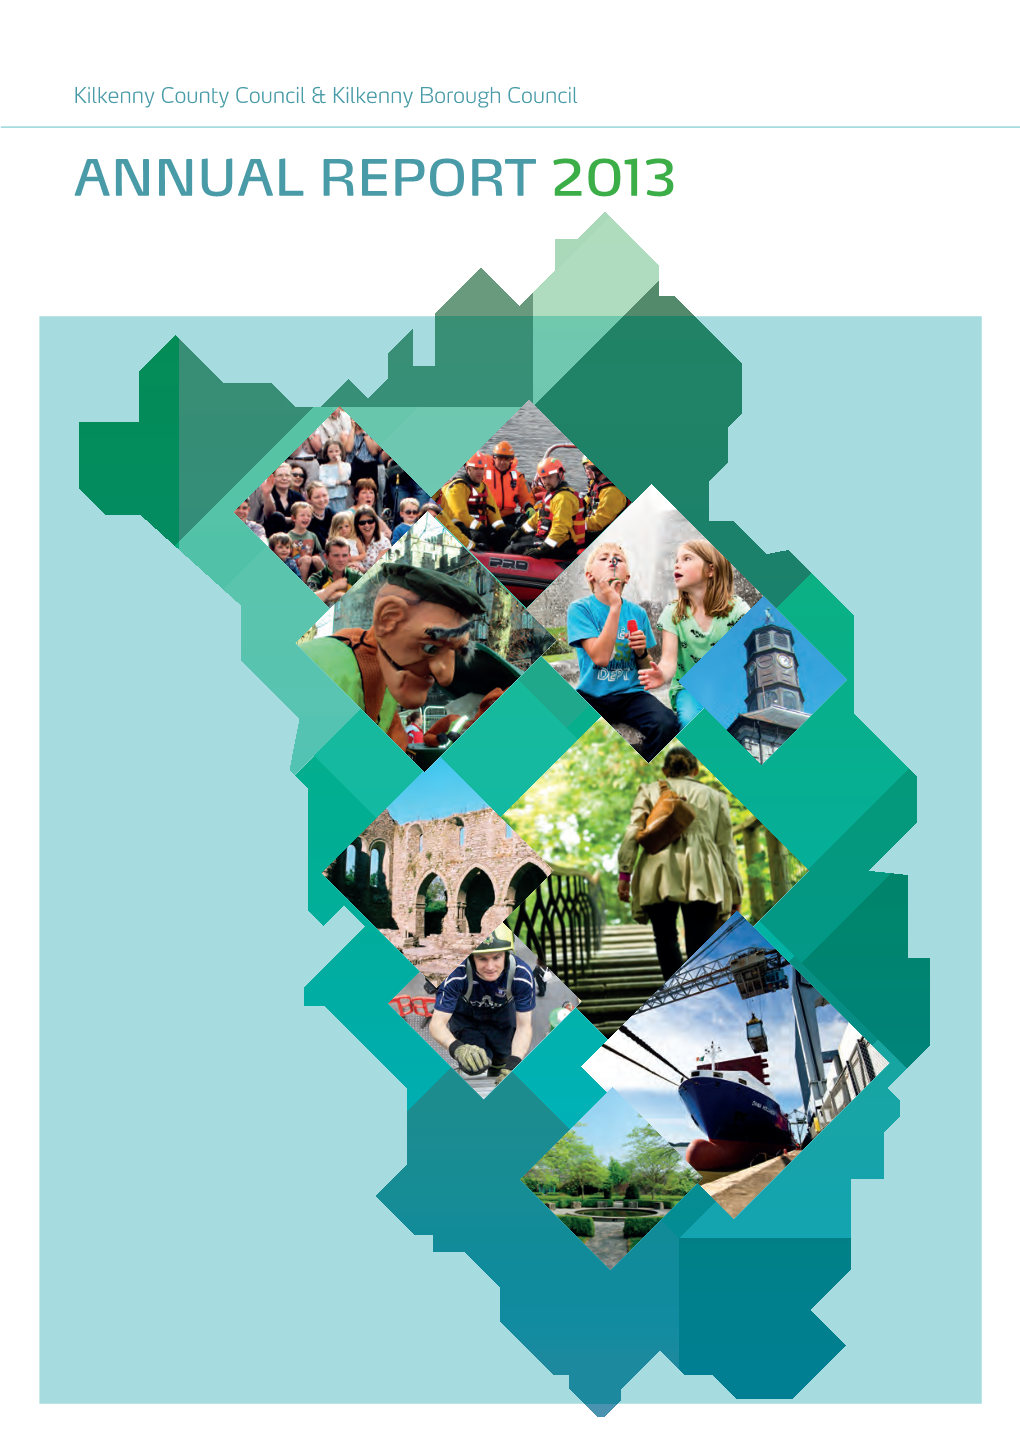 Kilkenny County Council Annual Report 2013.Pdf